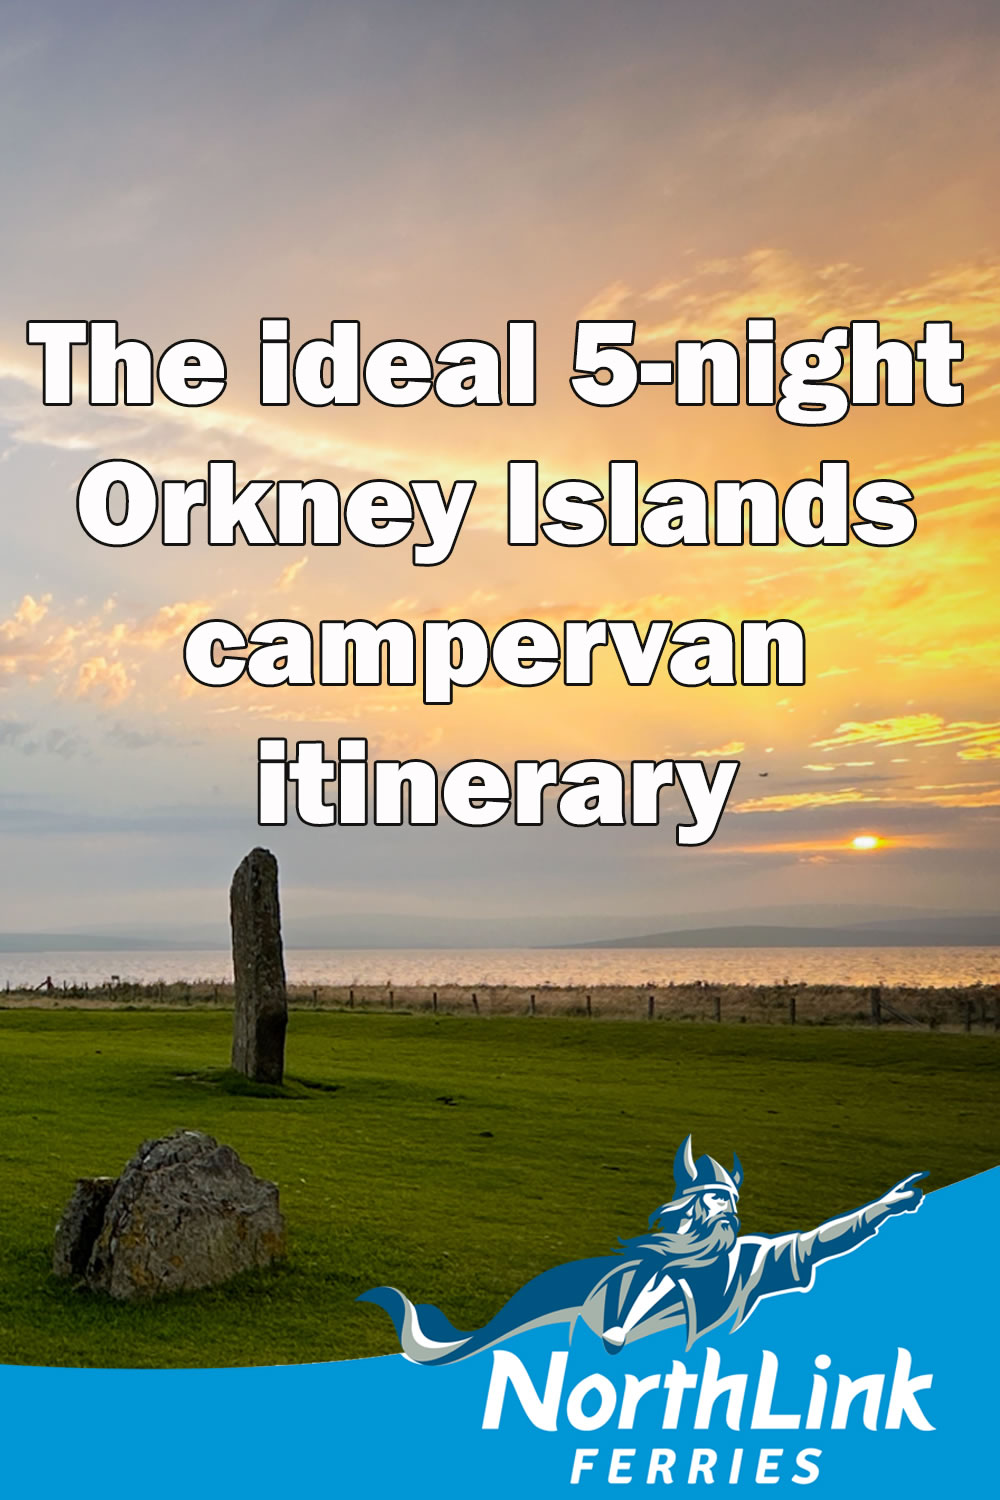 The ideal 5-night Orkney Islands campervan itinerary